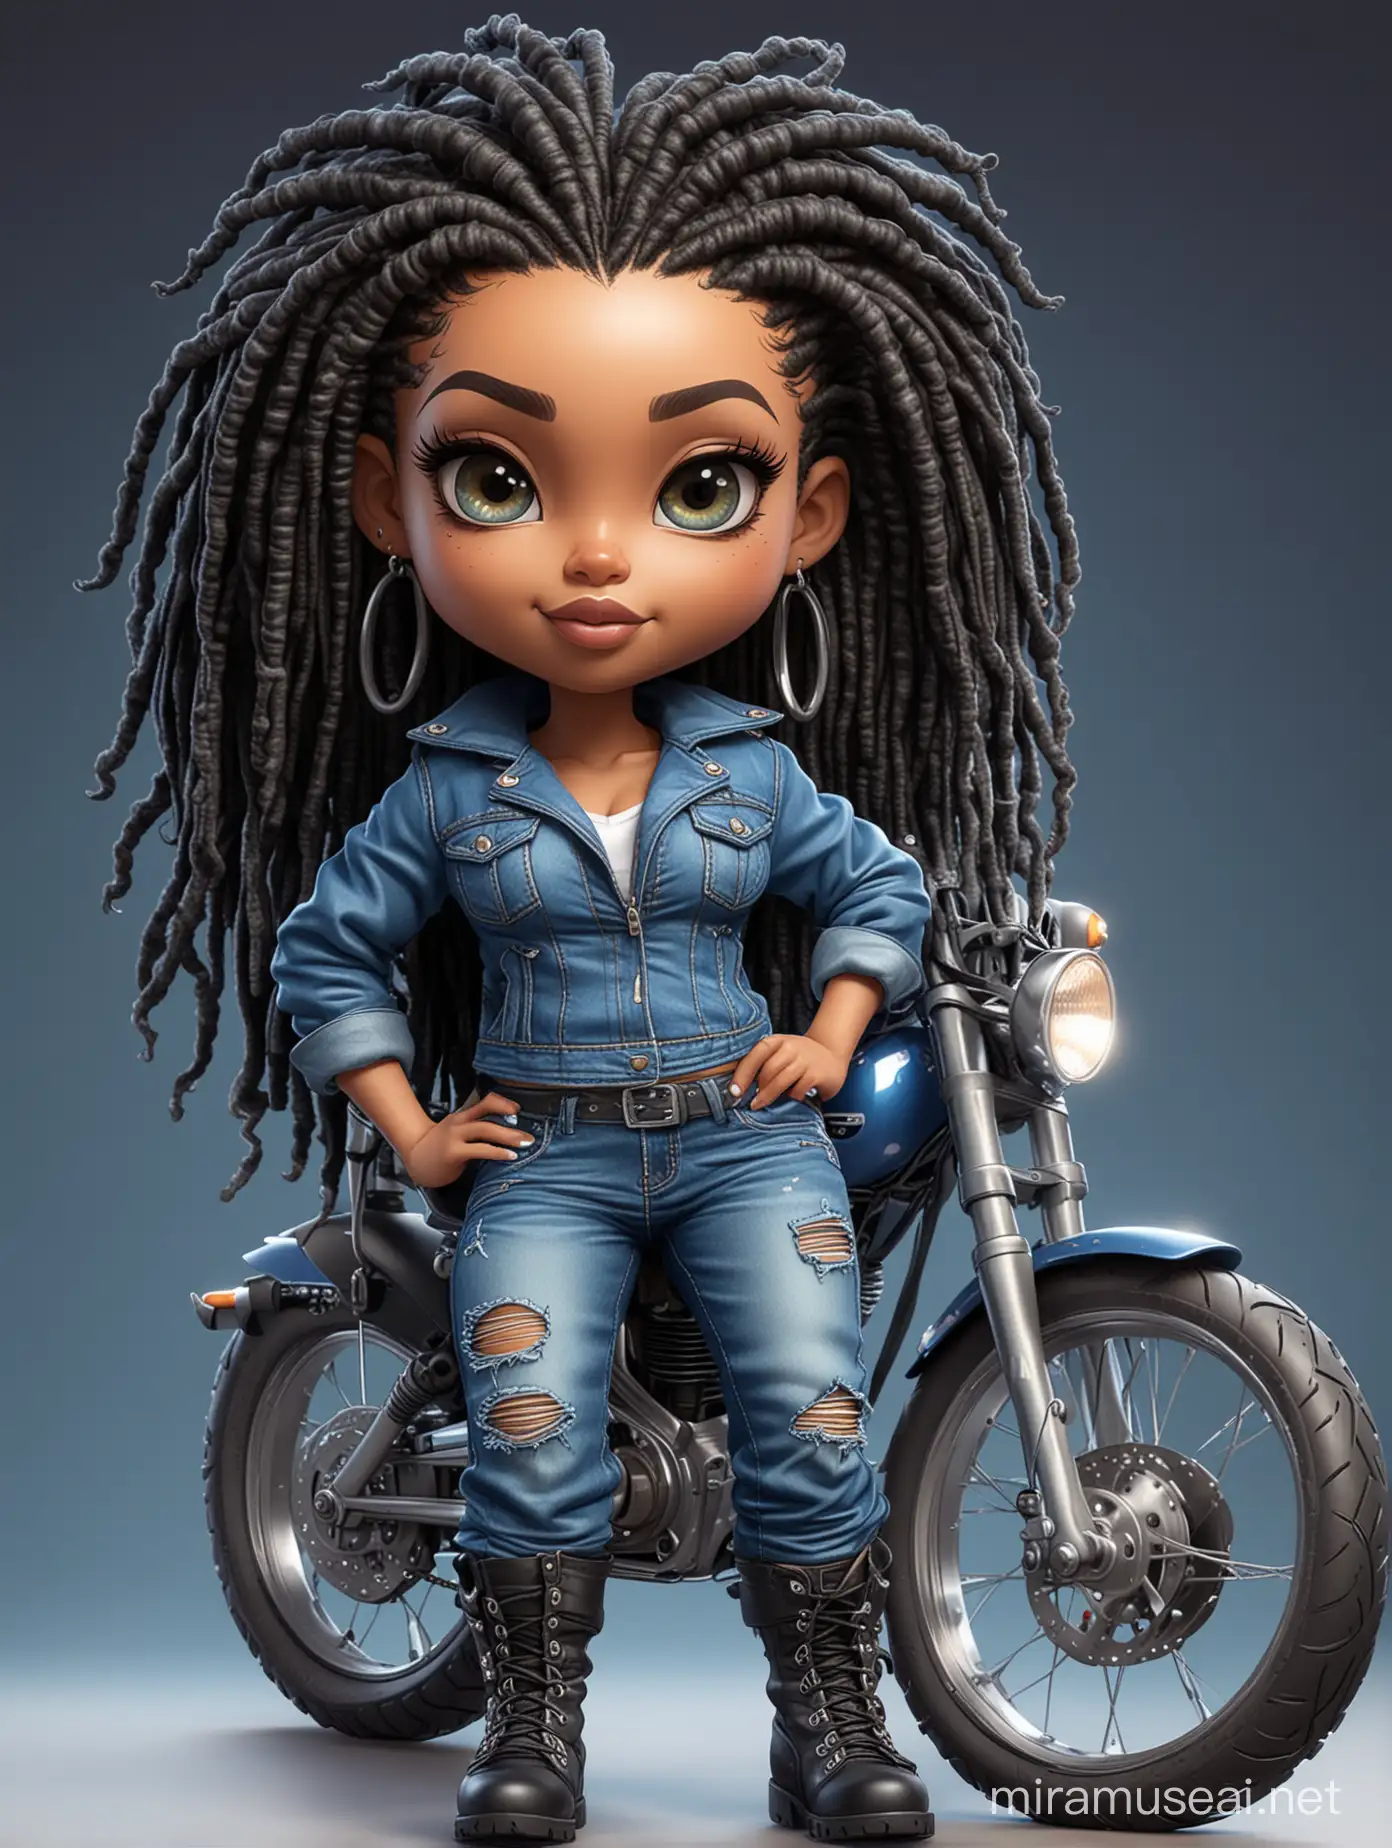 create an vibrant cartoon art illustration of a chibi cartoon voluptuous black female wearing a blue jean outfit with biker boots. Prominent make up with hazel eyes. Extremely highly detail of a twisted dreadlocks. Background of a bike show.